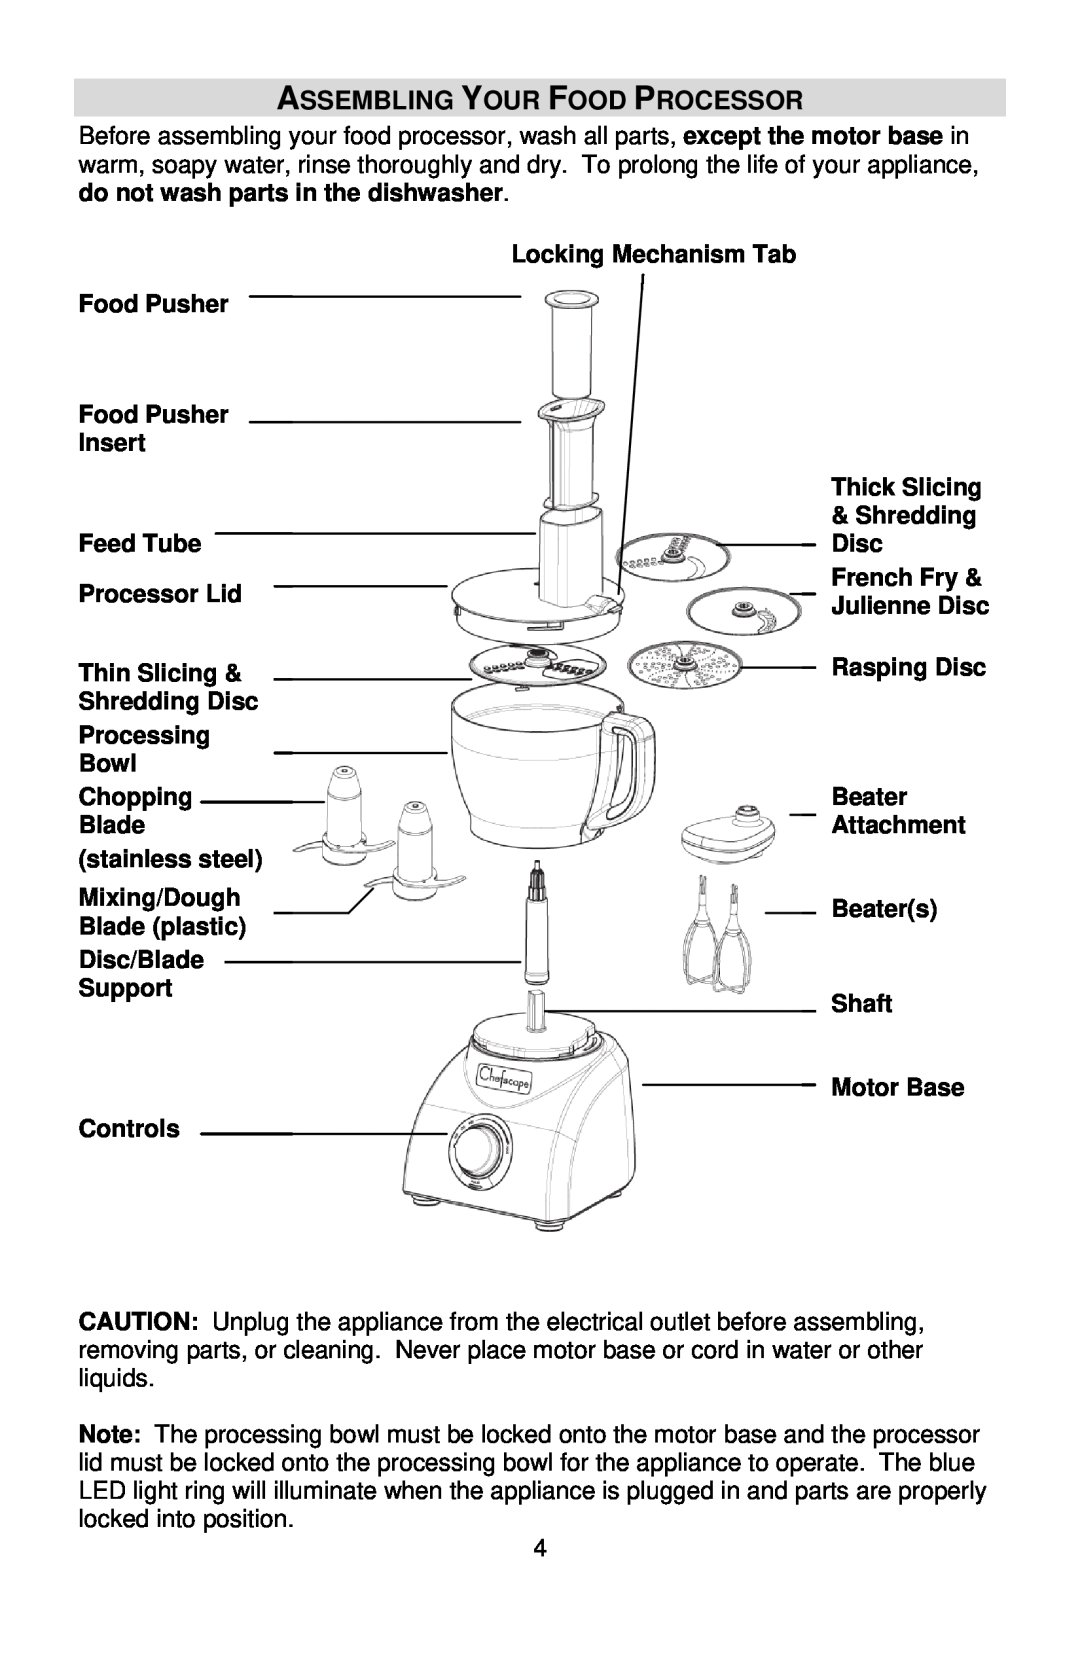 West Bend L5747, PRFP1000 Assembling Your Food Processor, Food Pusher Food Pusher Insert Feed Tube, Controls 